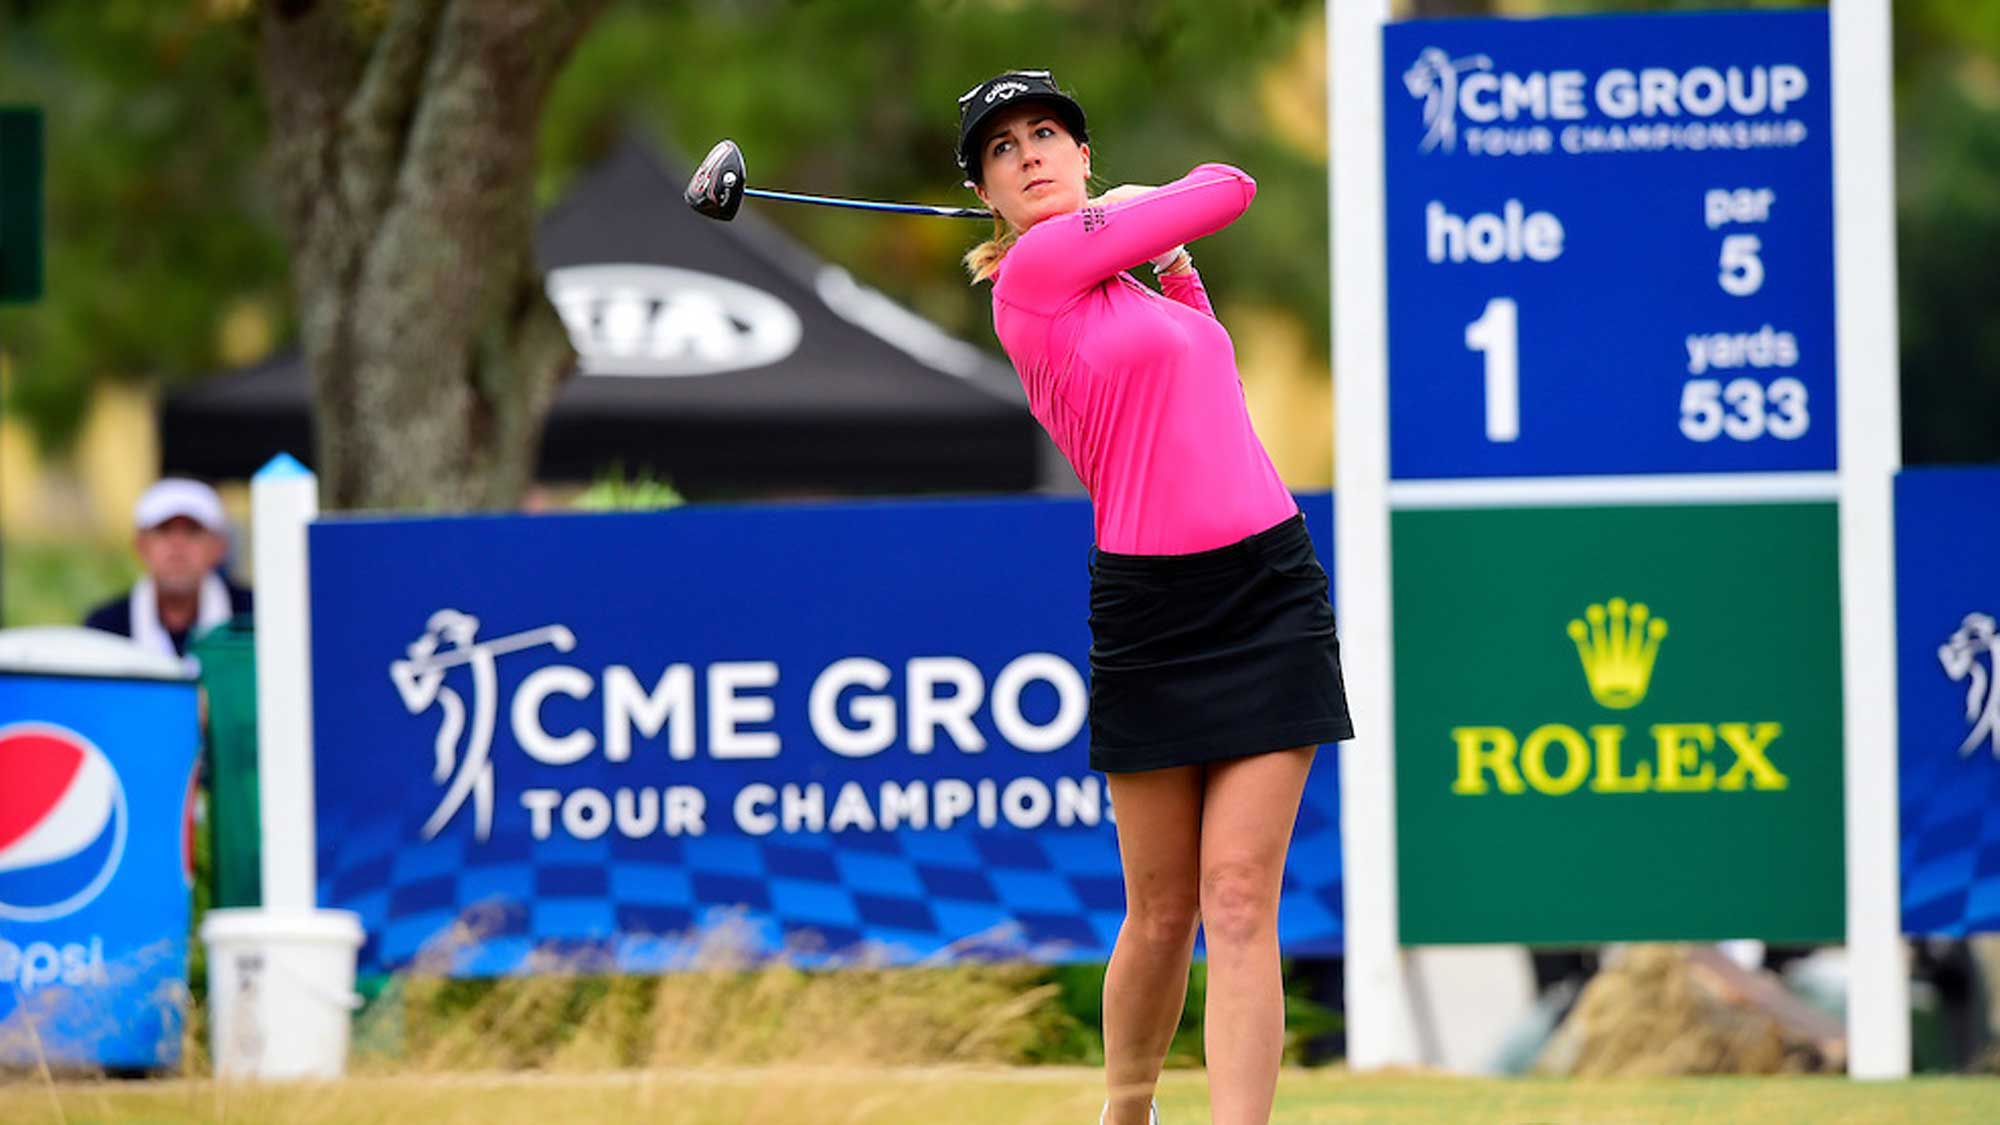 CME Group Extends Title Sponsorship of Tour Championship and Race to